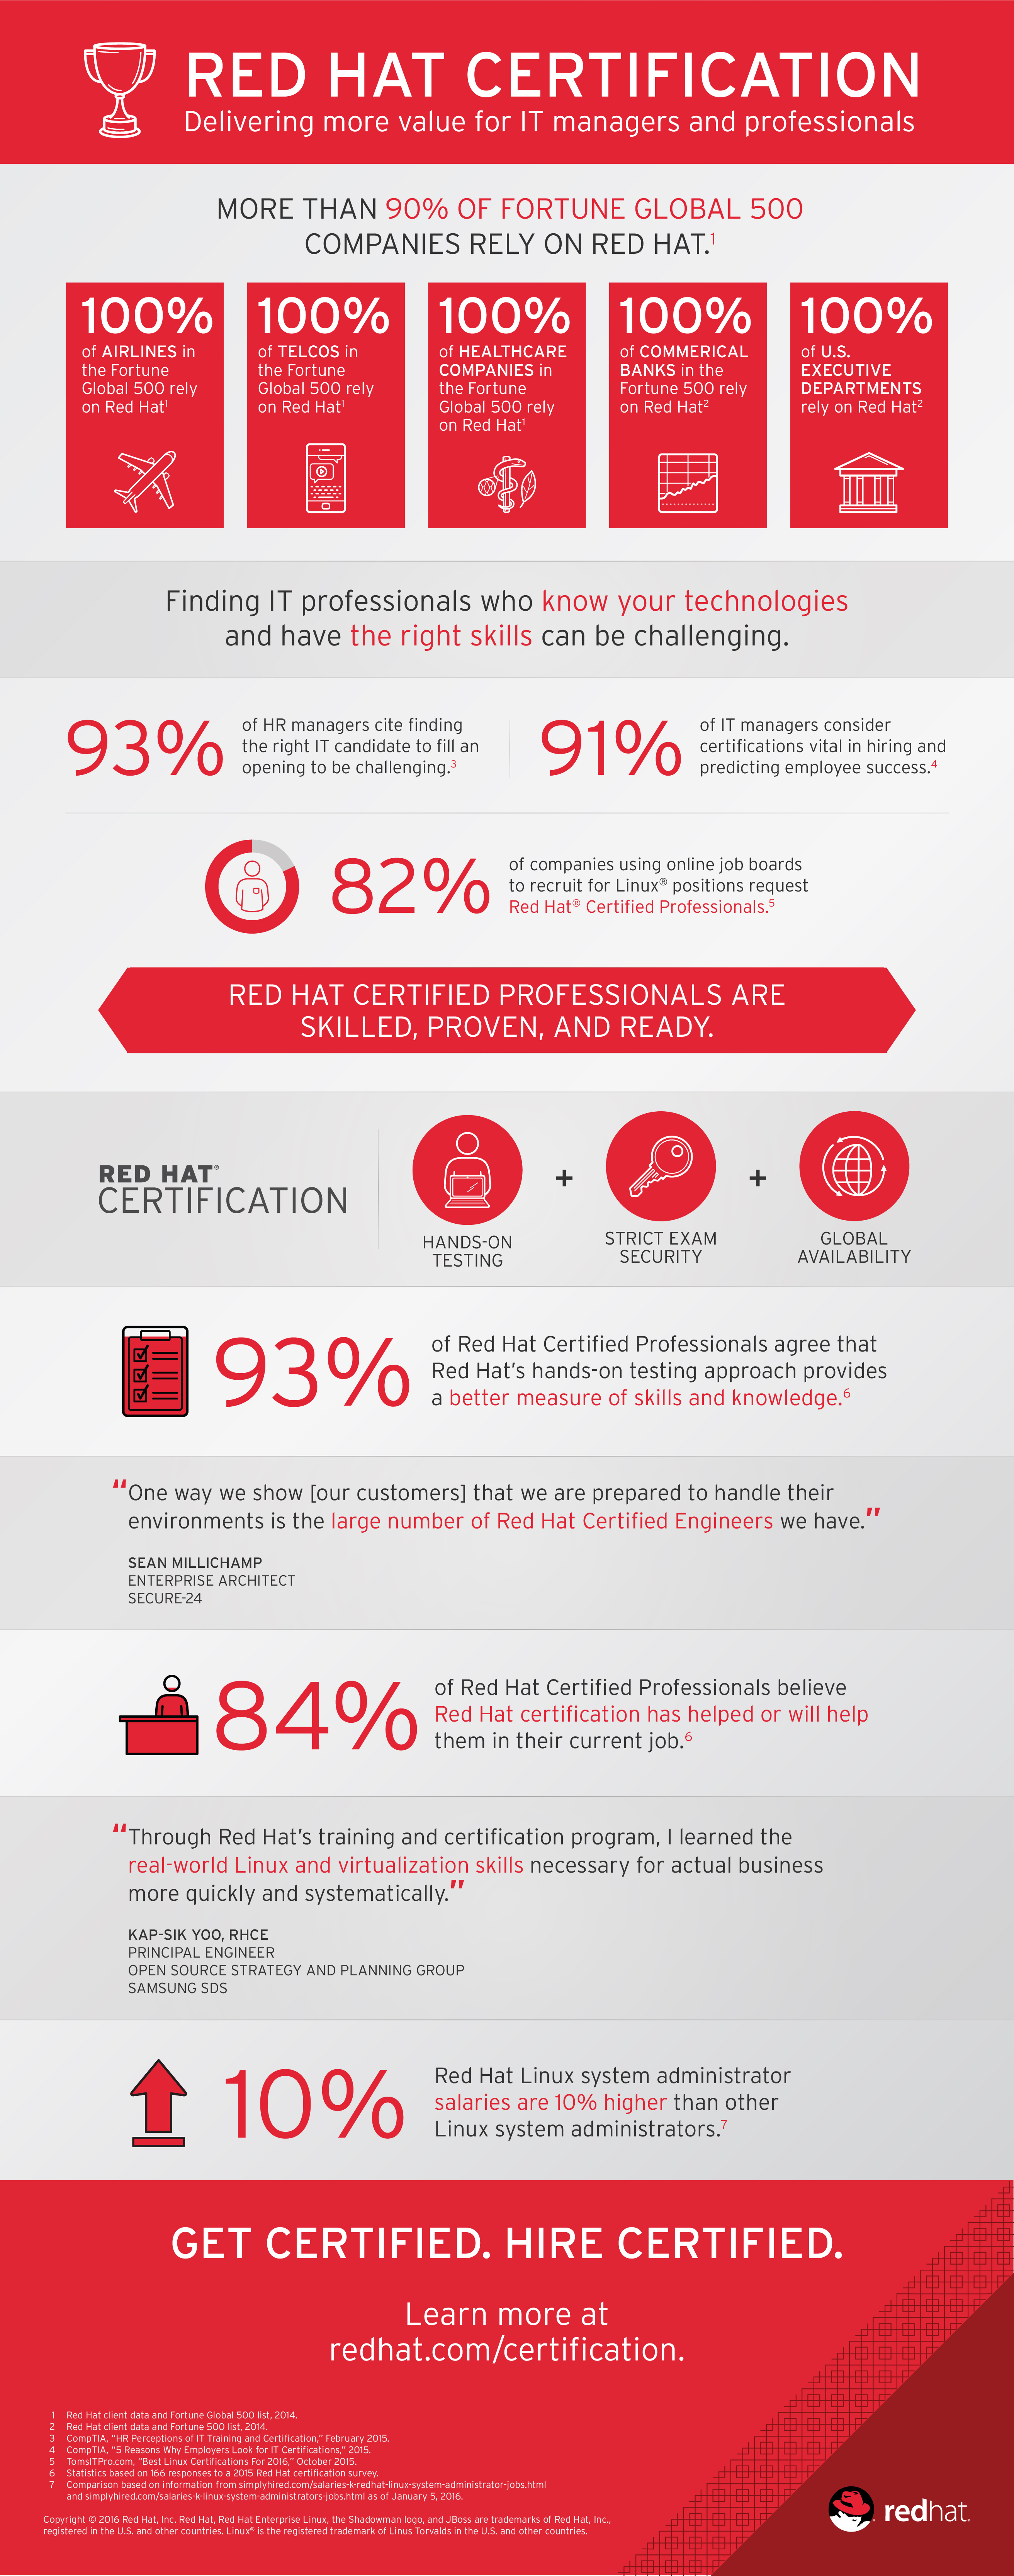 Red Hat Certified Professionals Weigh In on Value of Certification